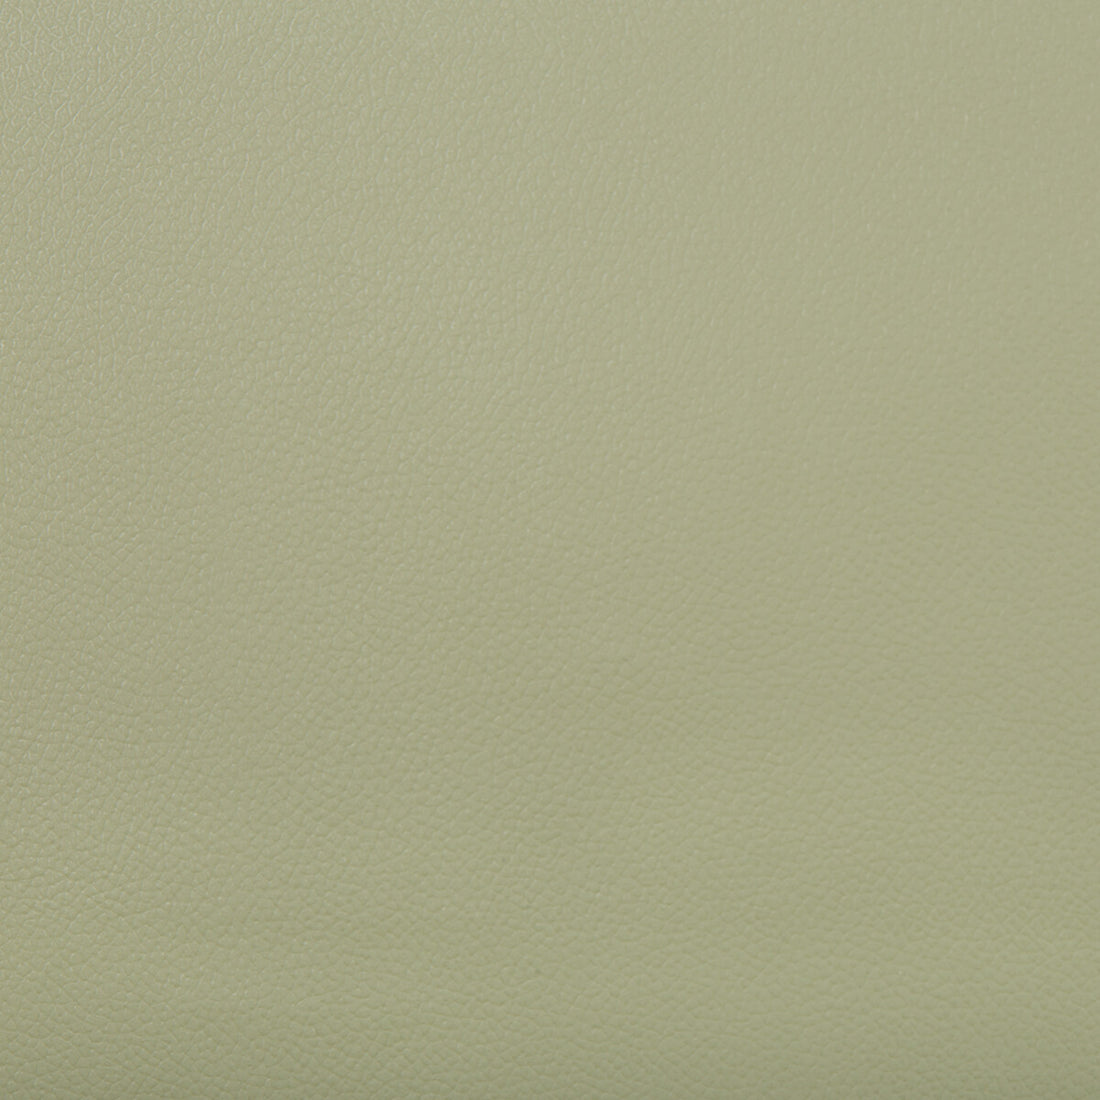 Extreme fabric in olive color - pattern EXTREME.130.0 - by Kravet Contract in the Faux Leather Extreme Performance collection